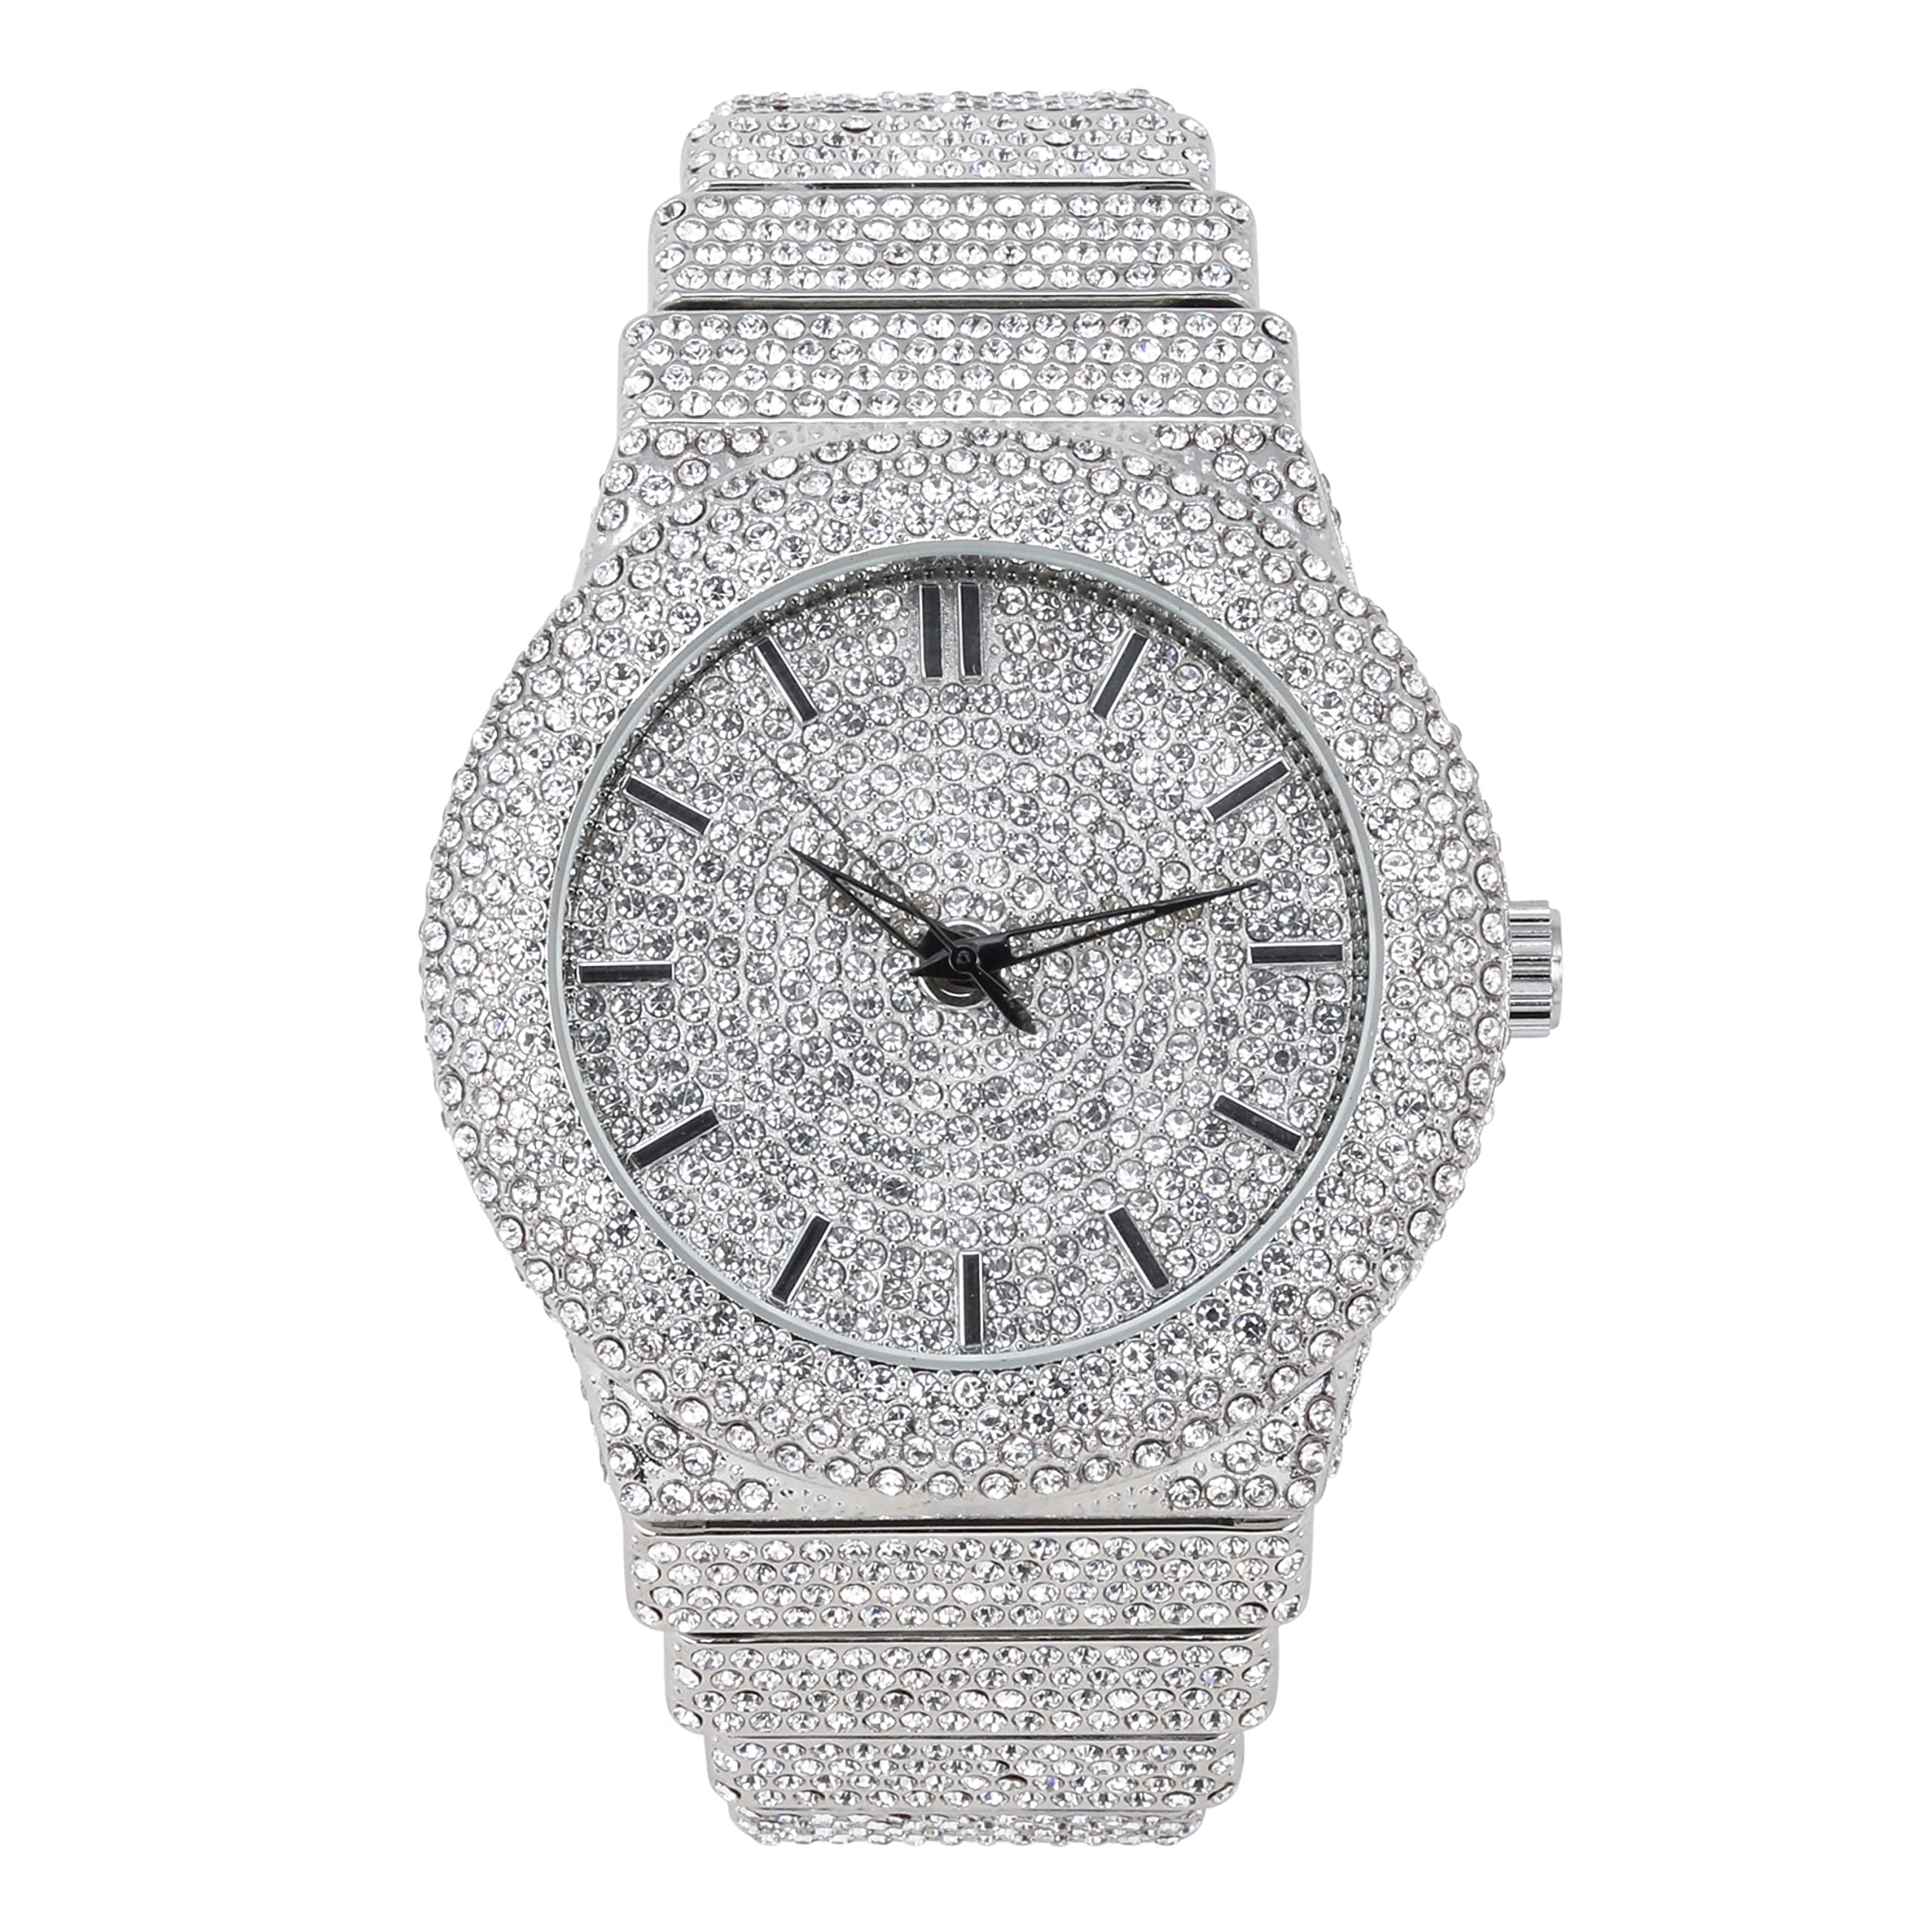 Men's Round Chandelier Watch 46mm Silver- Fully Iced Band